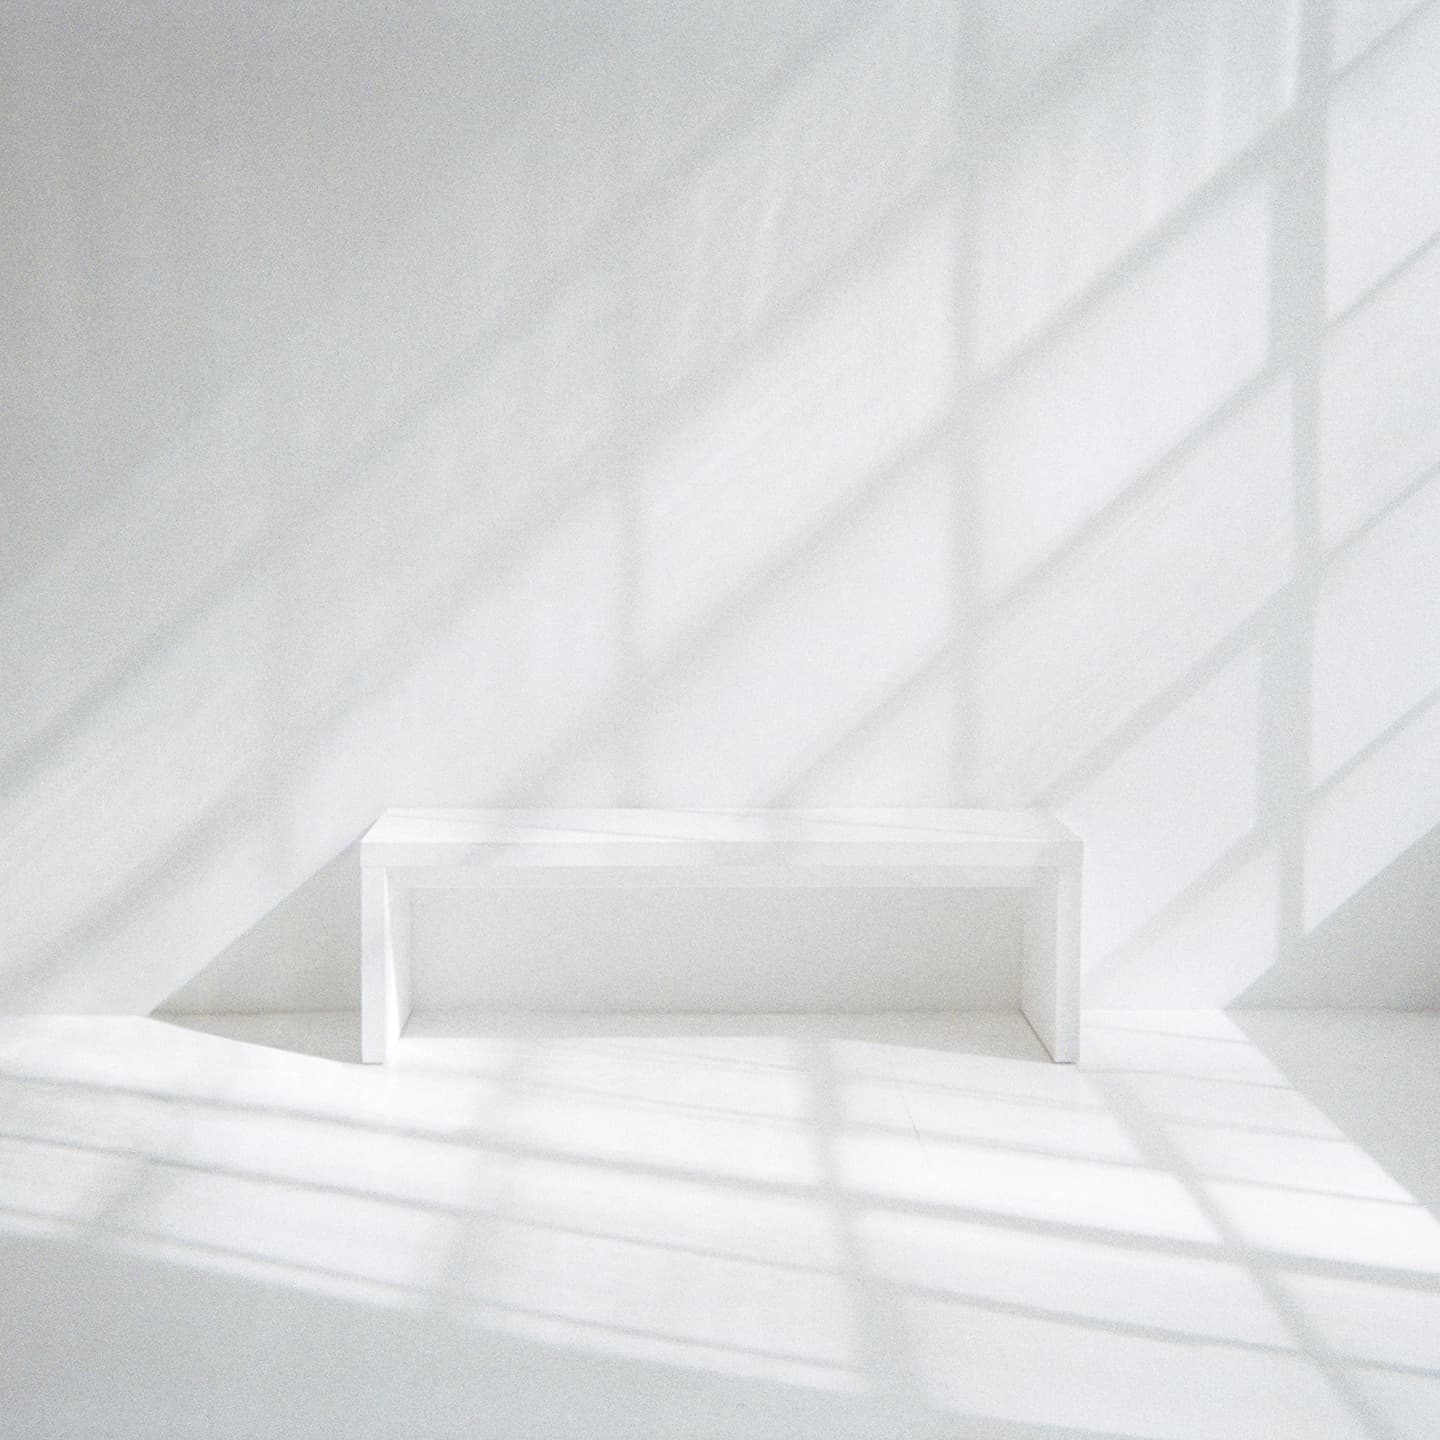 Sun beams shine on white bench against white wall in empty room.